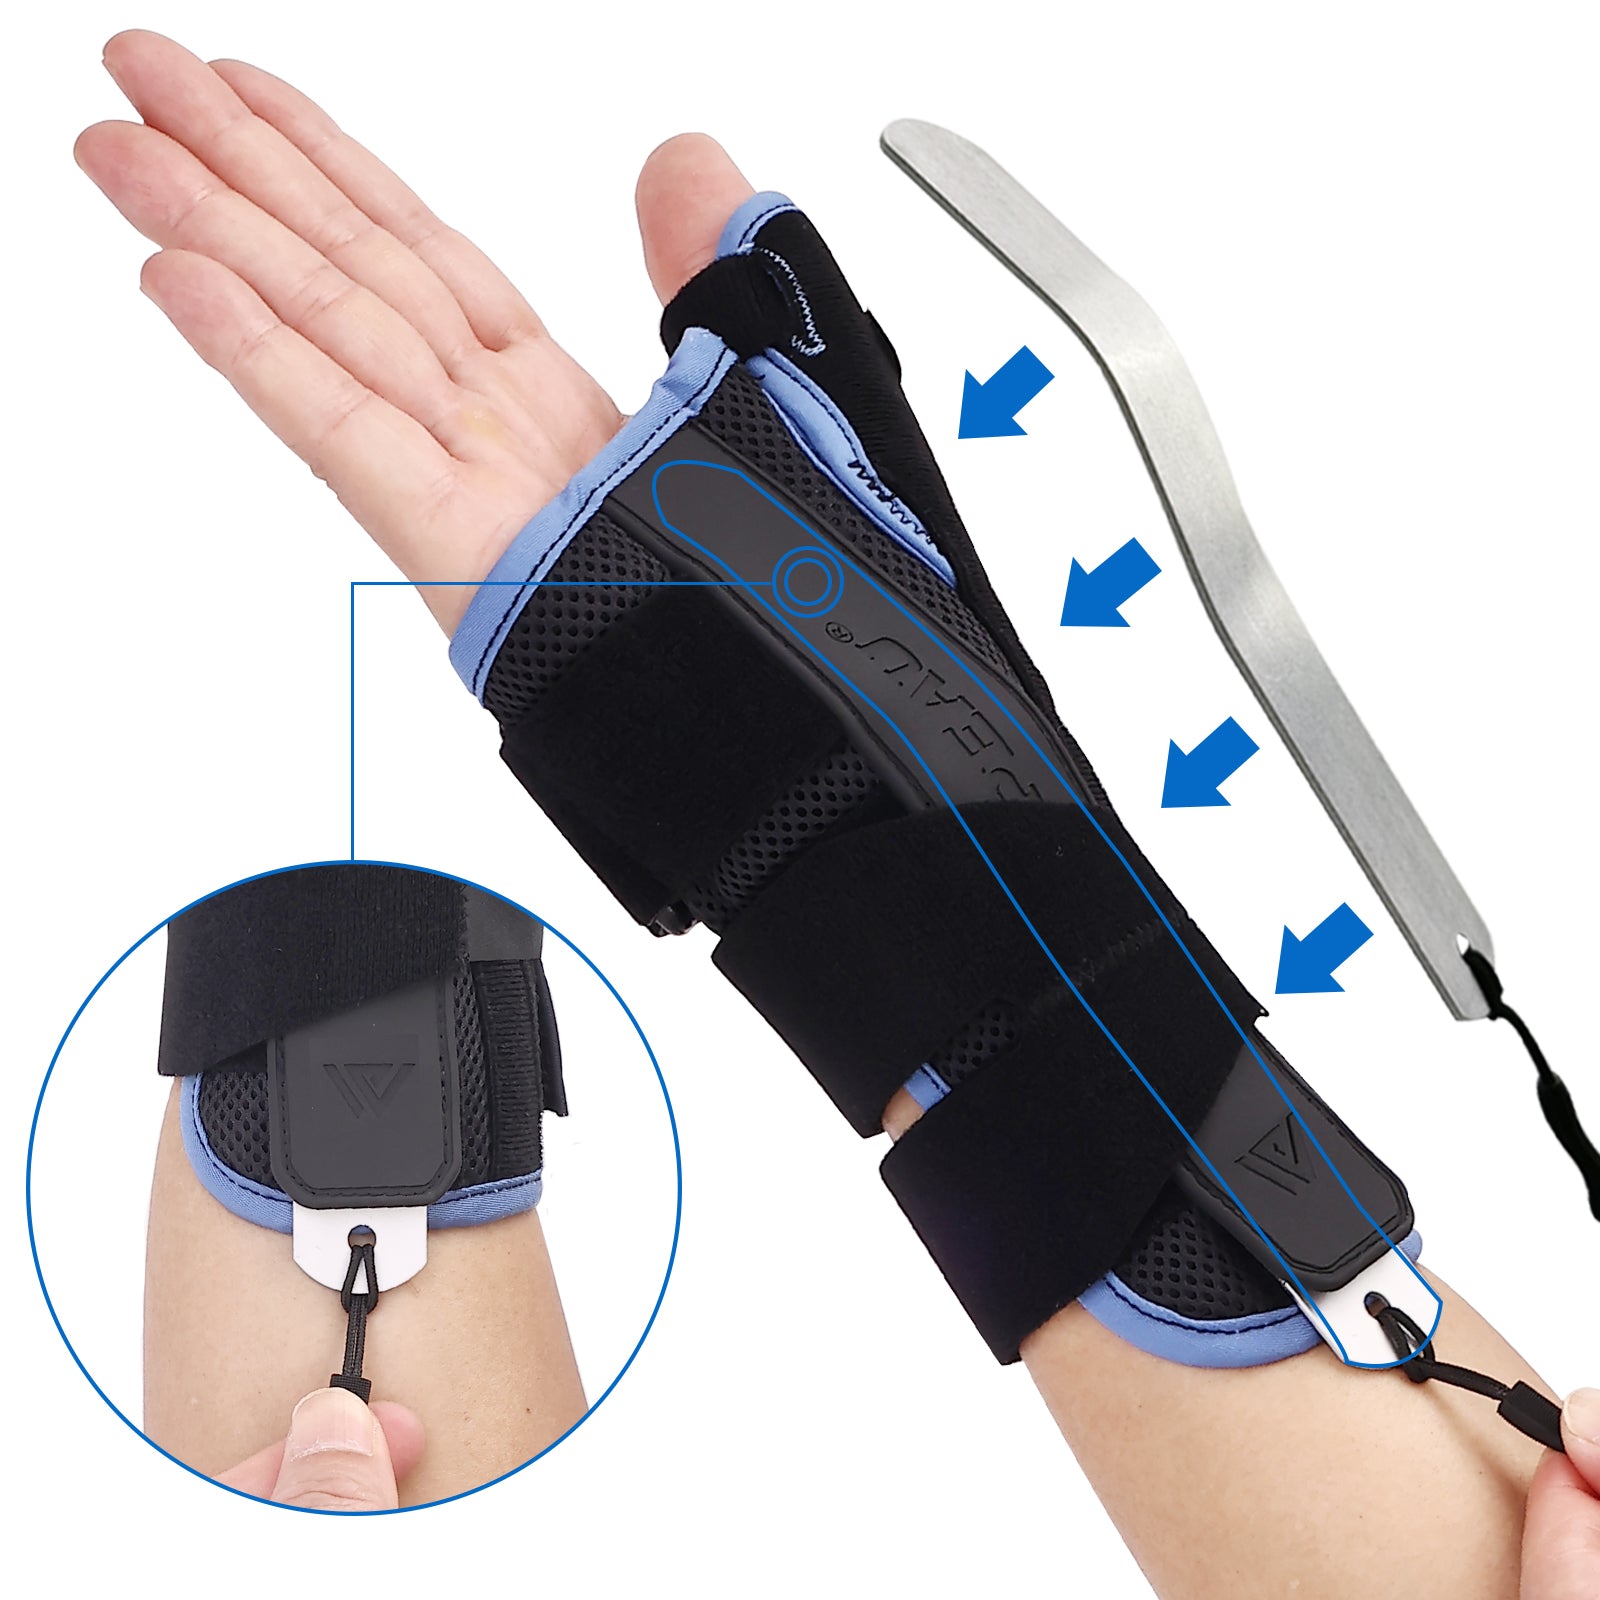 Wrist Brace With Thumb Support at Rs 55, Fajalpur Road